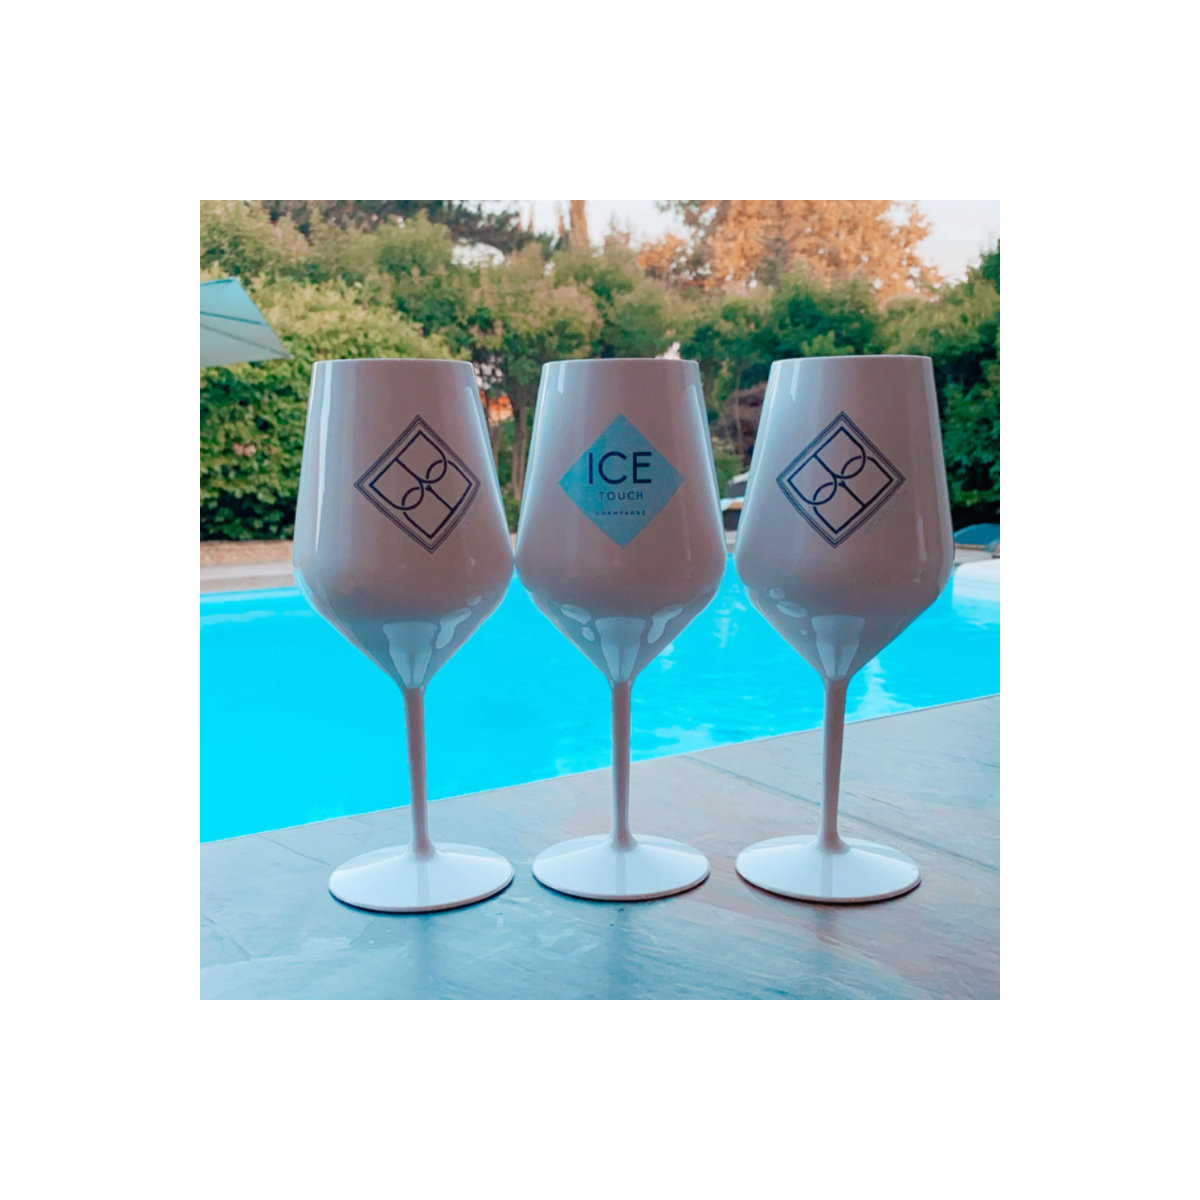 https://www.champagneboudebaudin.fr/1758-prod_carre_thickbox/verres-a-cocktail-ice-touch.jpg